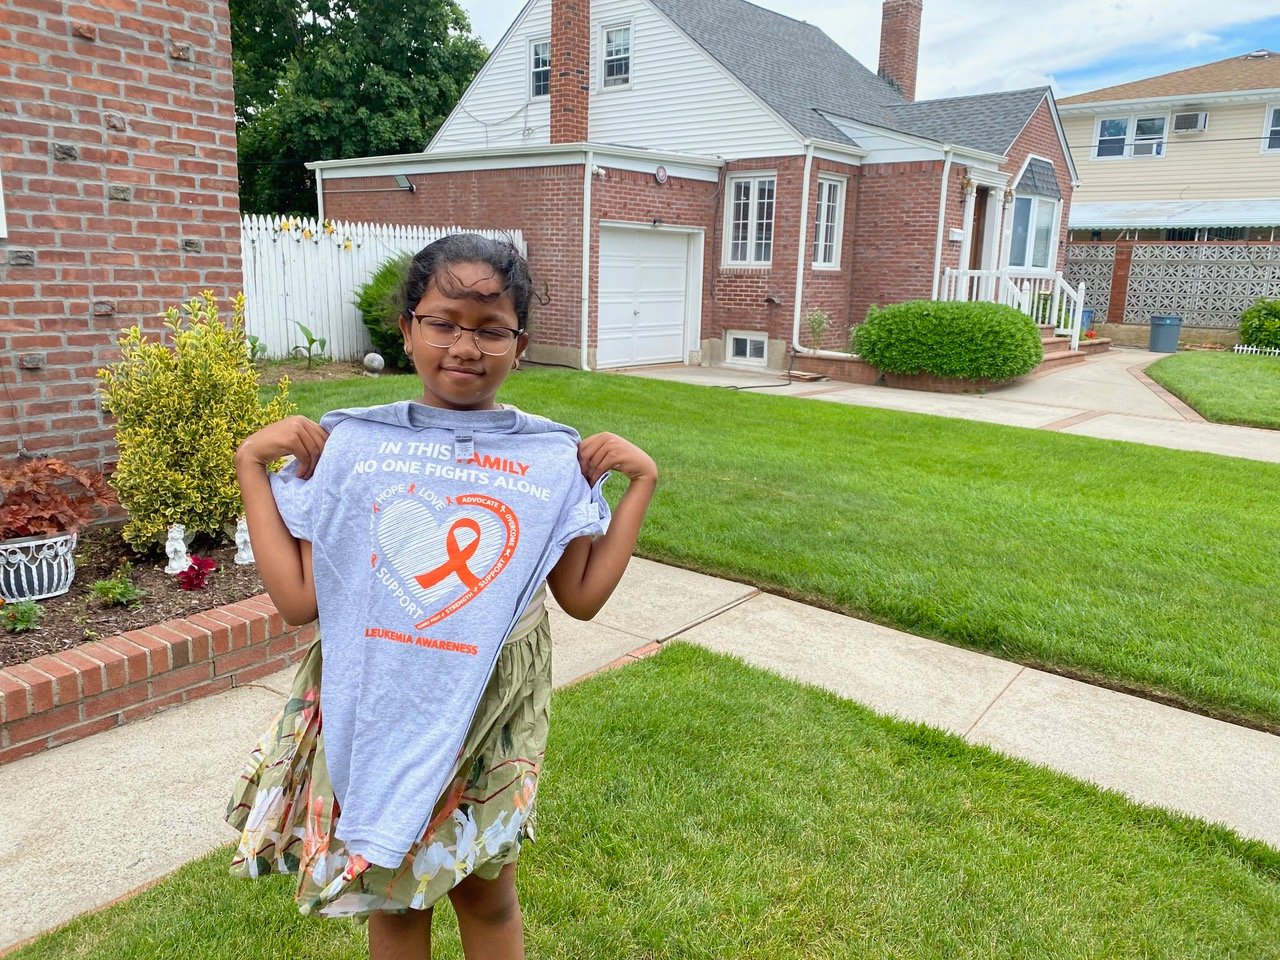 The Raime family, Lianna’s grandmother Michelle explained, had T-shirts made to express support for Lianna that bear the motivational phrase “In this family, no one fights alone.”